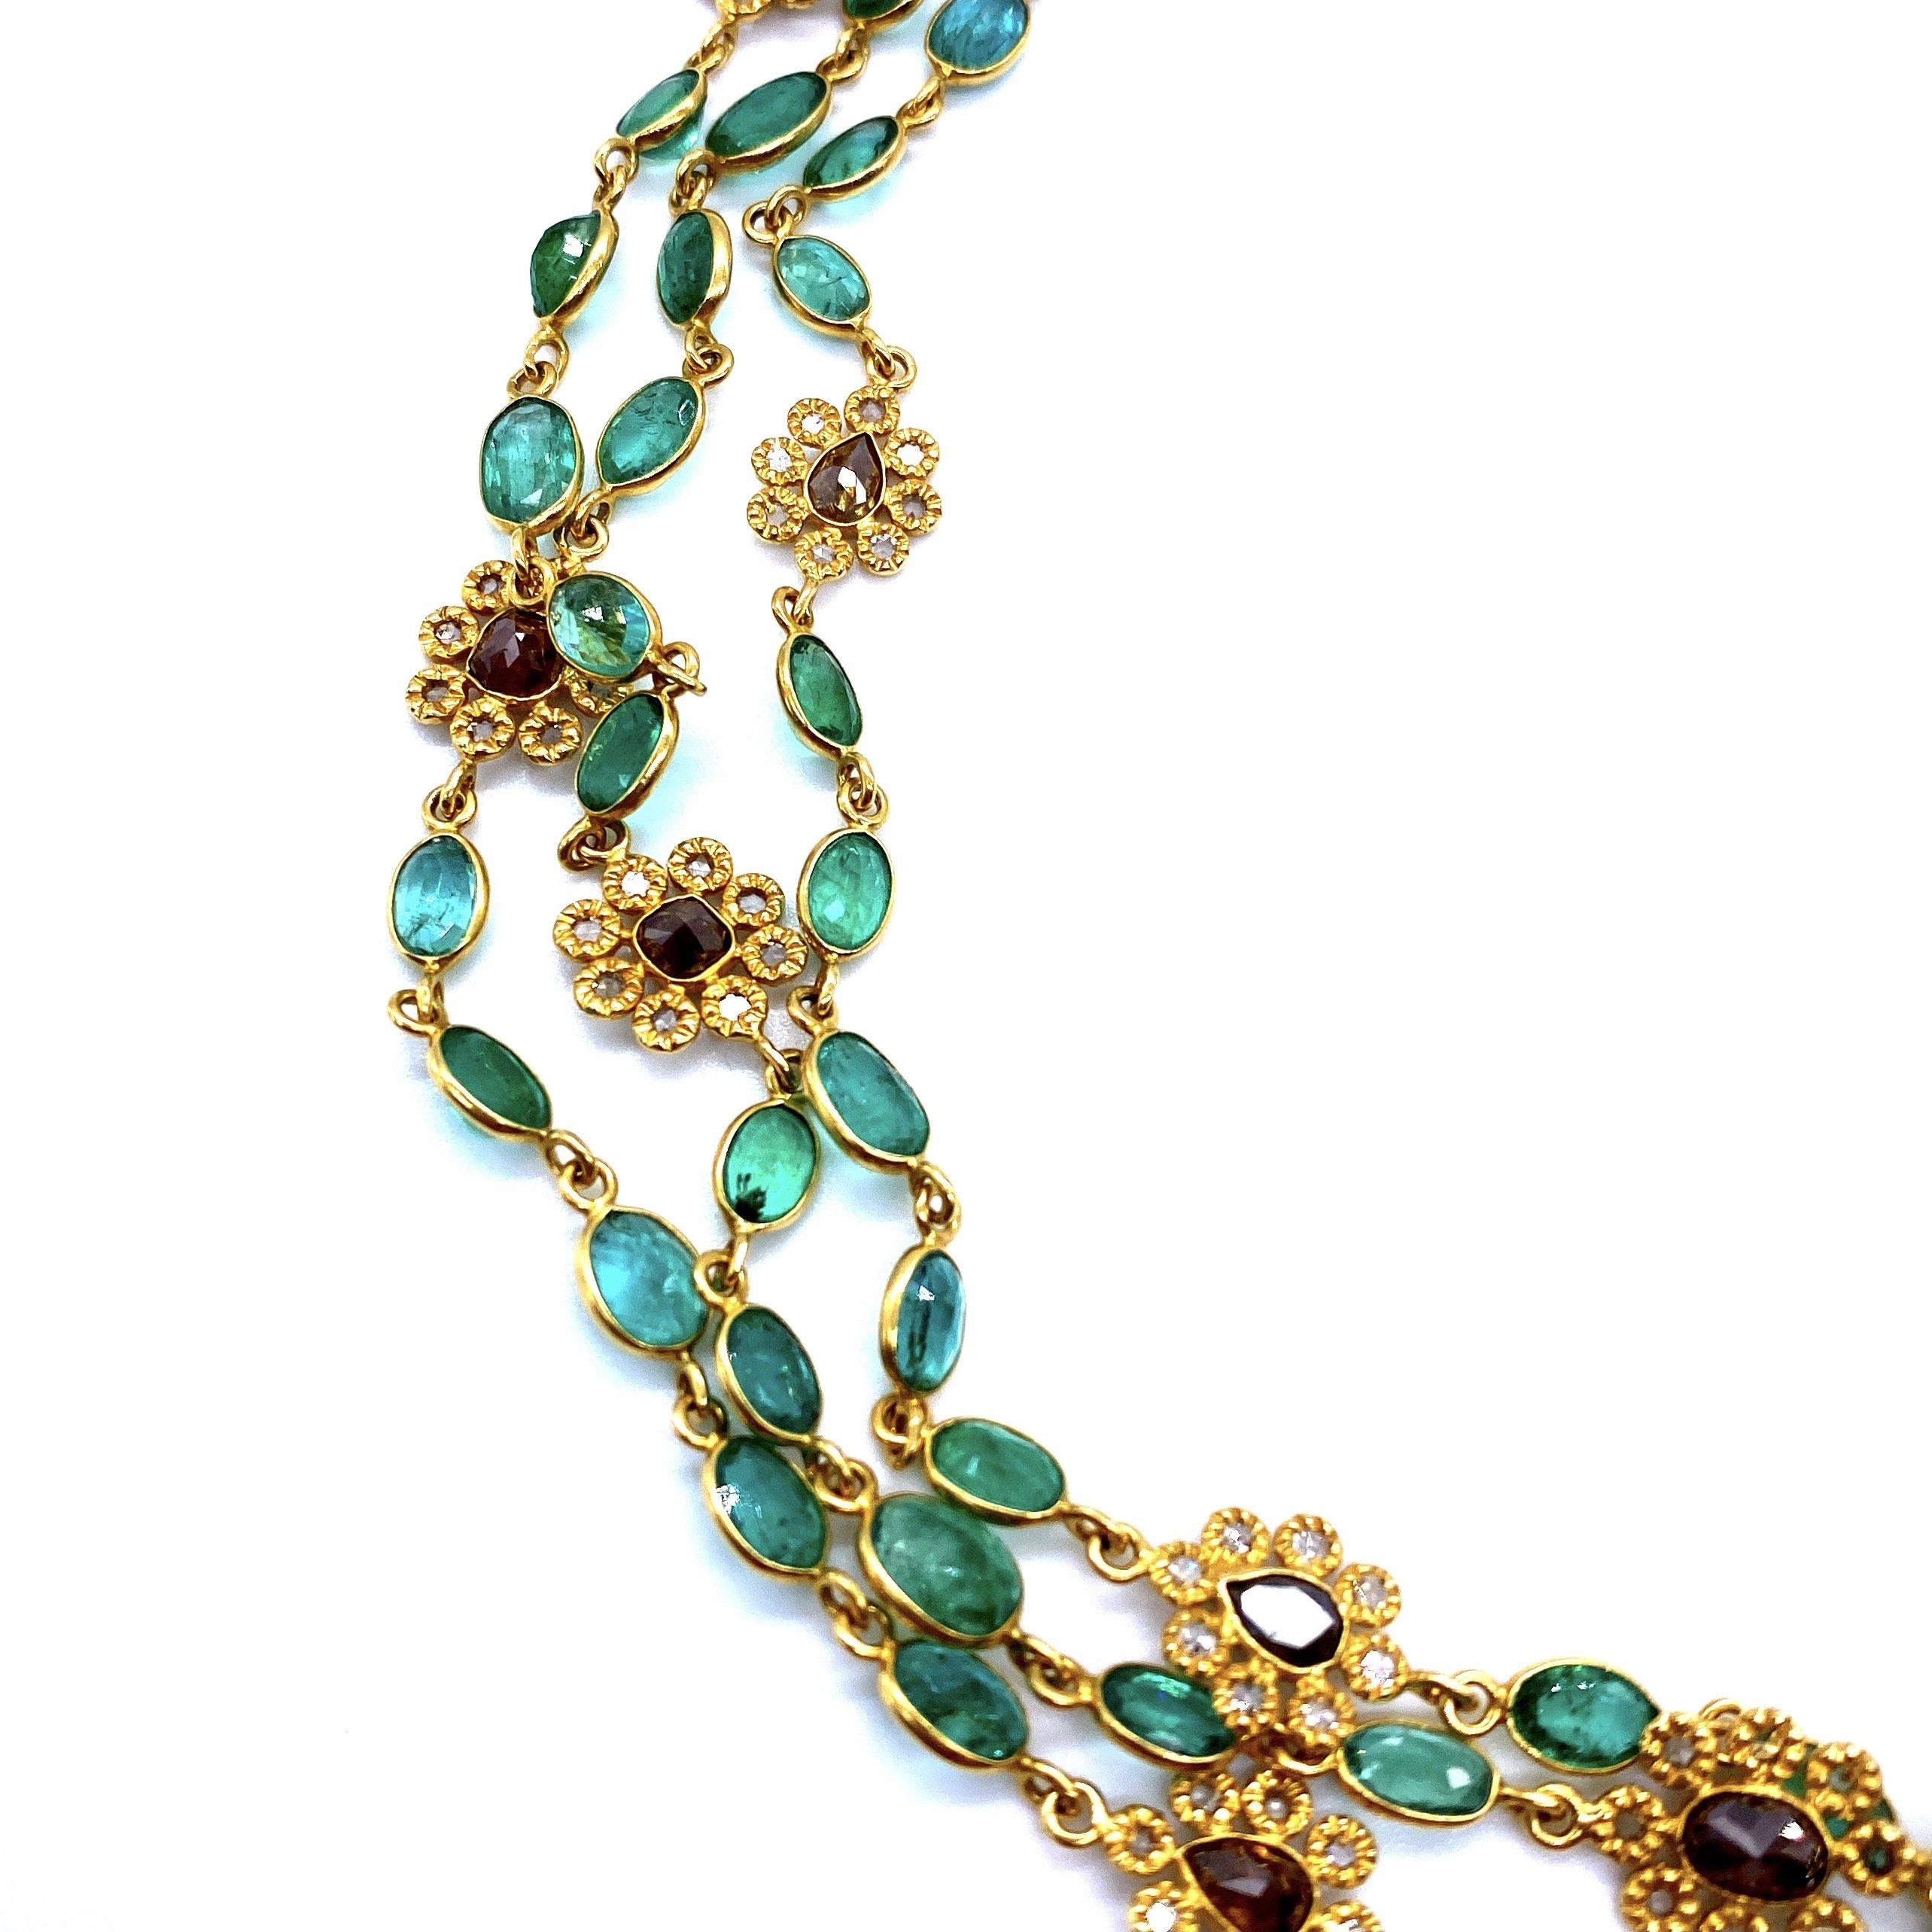 Affinity Long Necklace set in 20K Yellow Gold. Emerald 44.11cts, and 12.56cts Diamonds with brown diamonds in the flowers. Necklace measures at 52 inches.

44.11cts Emerald 
12.56cts Diamonds 
52 Inches 
20K Yellow Gold 